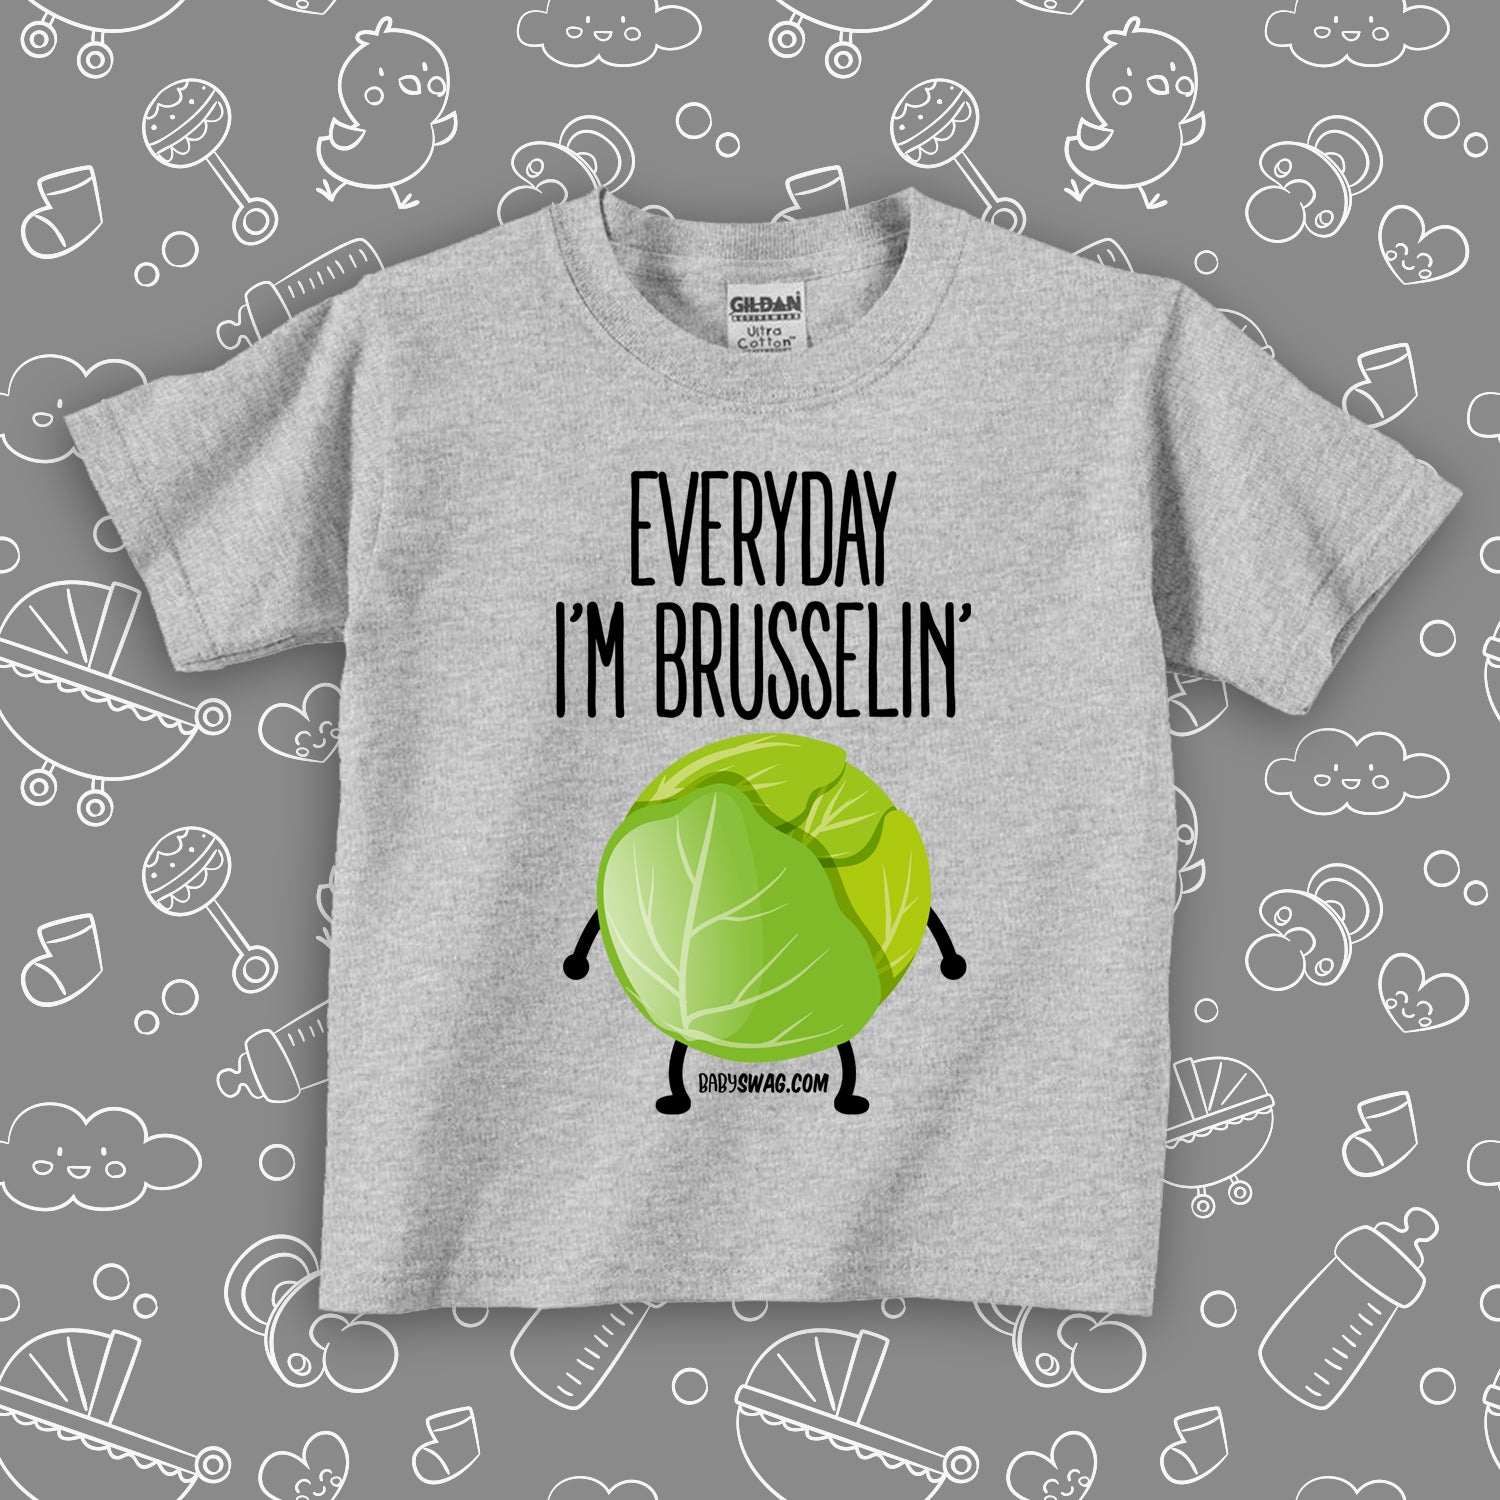 Grey todder graphic tee saying "Everyday I'm Brusselin'" and a drawing of a Brussel sprout with arms and legs. 